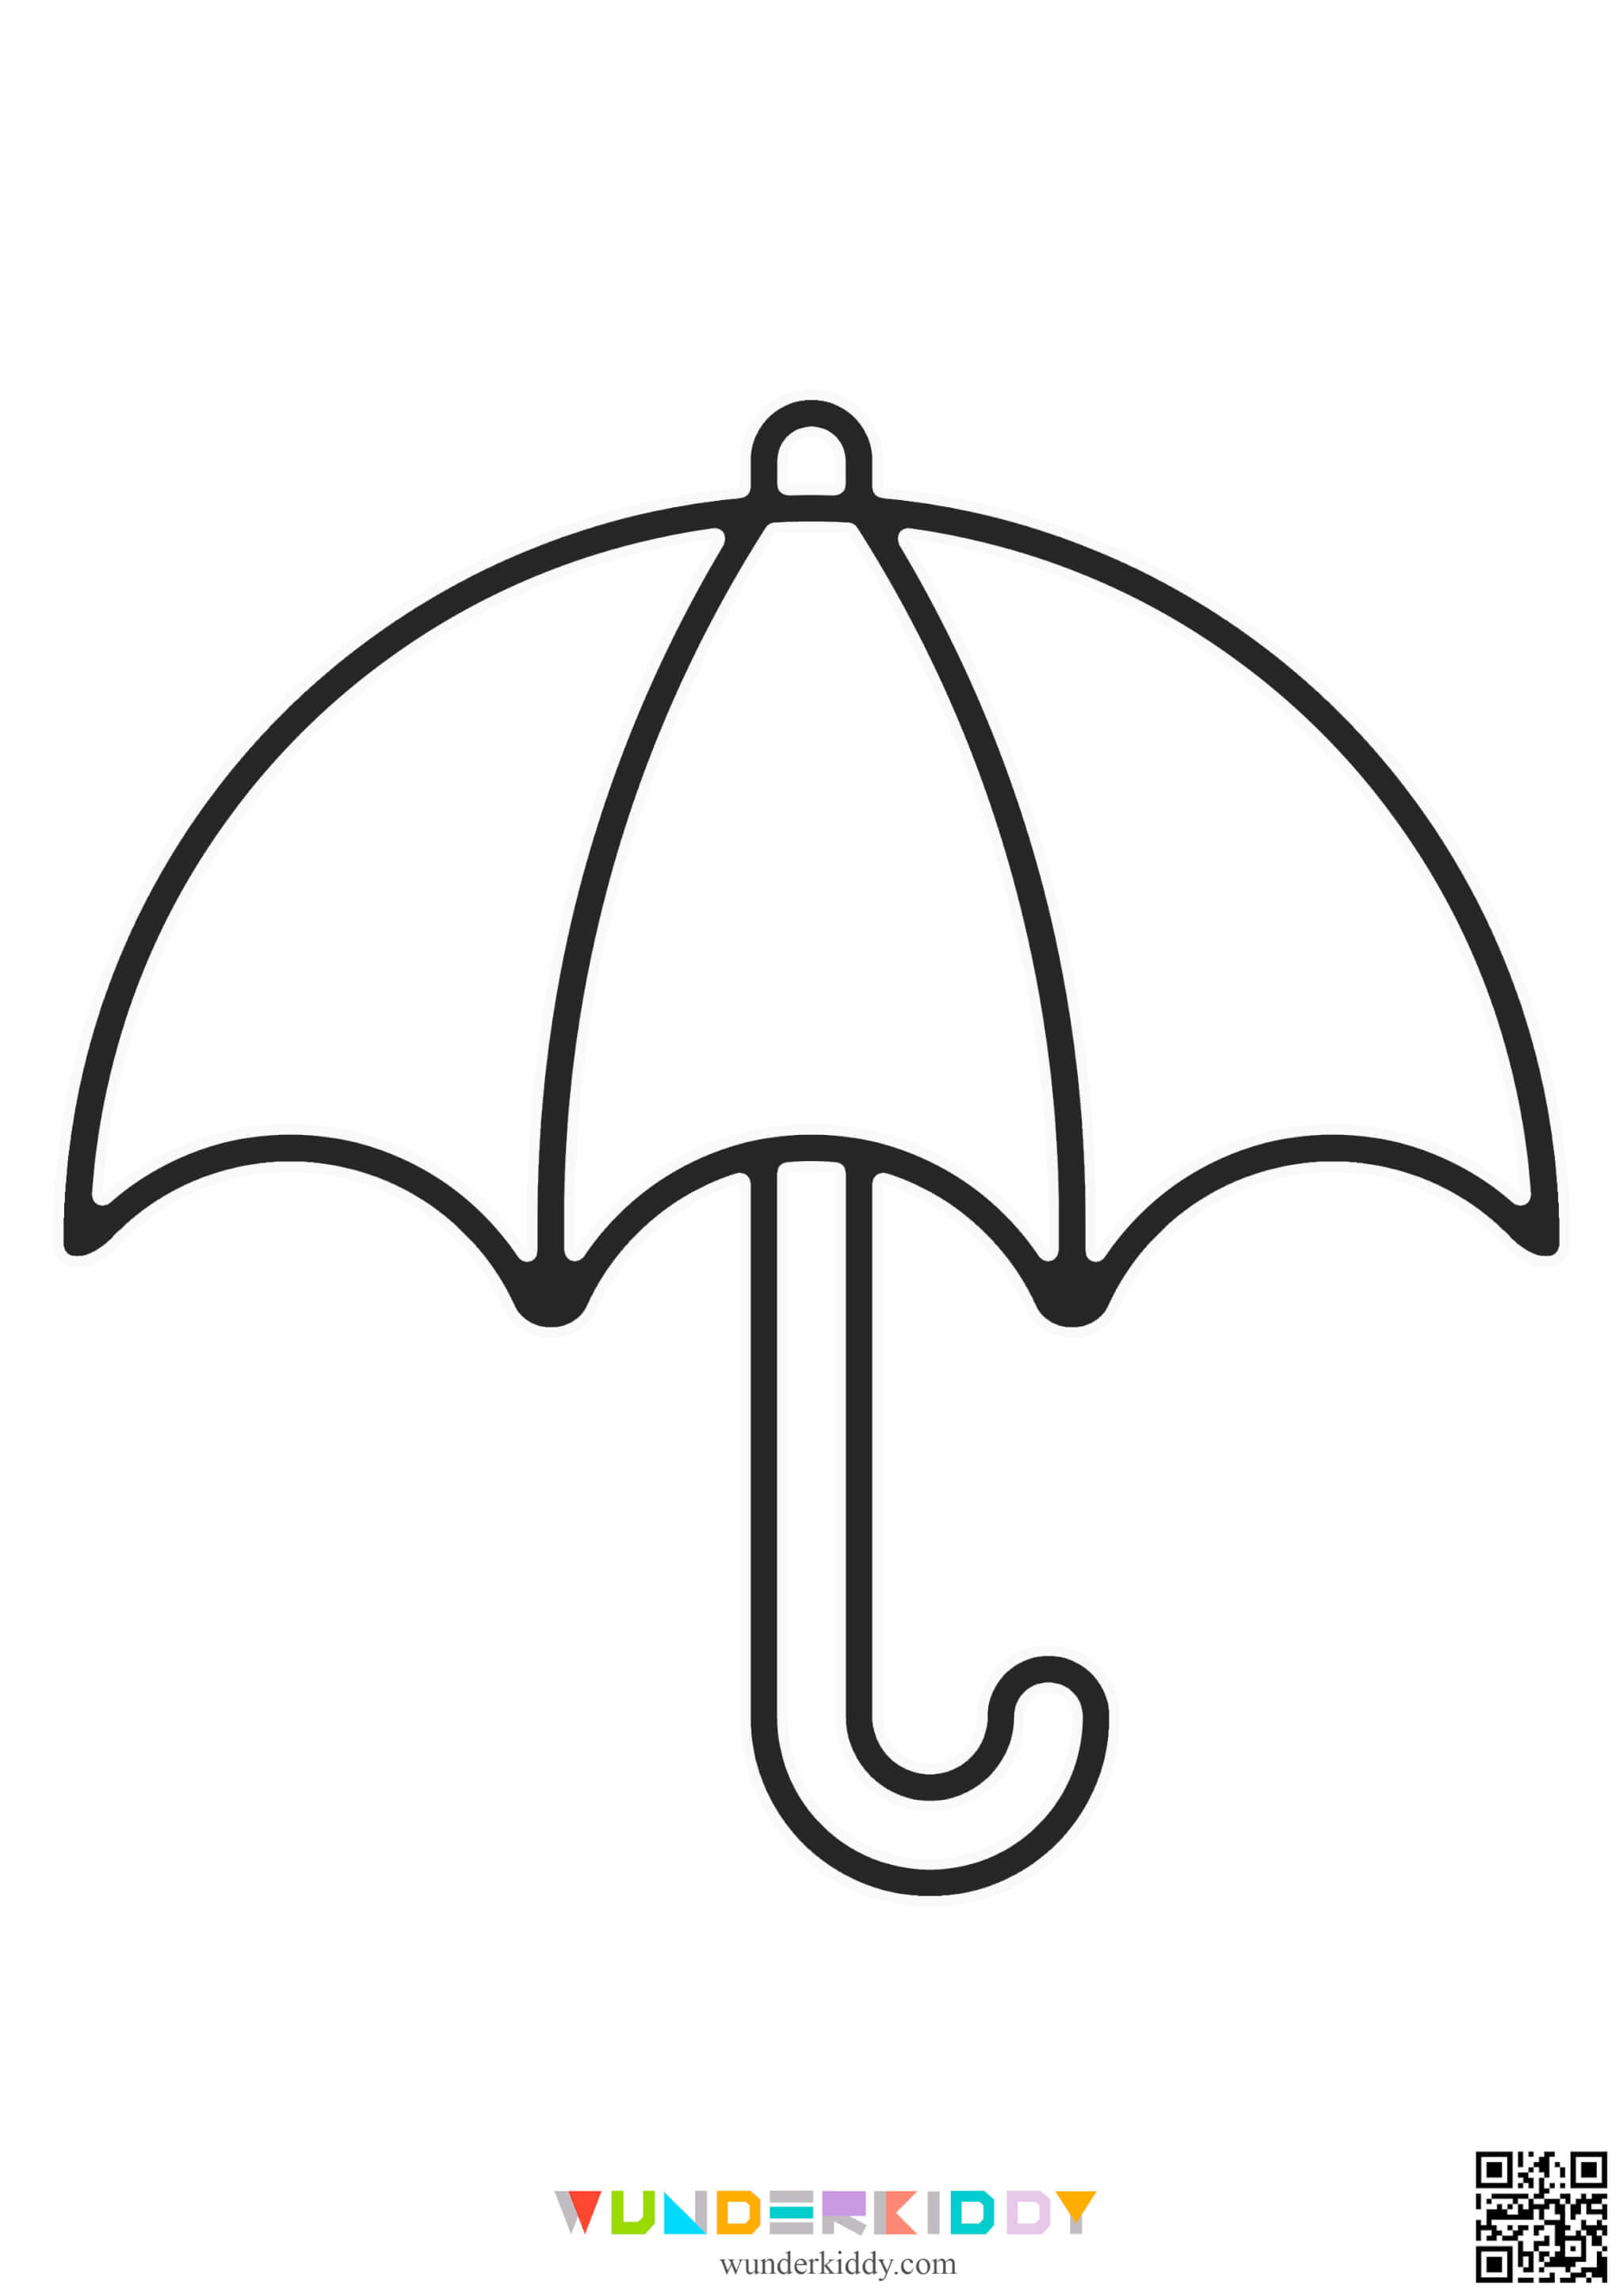 Umbrella Coloring Pages for Kids - Image 7